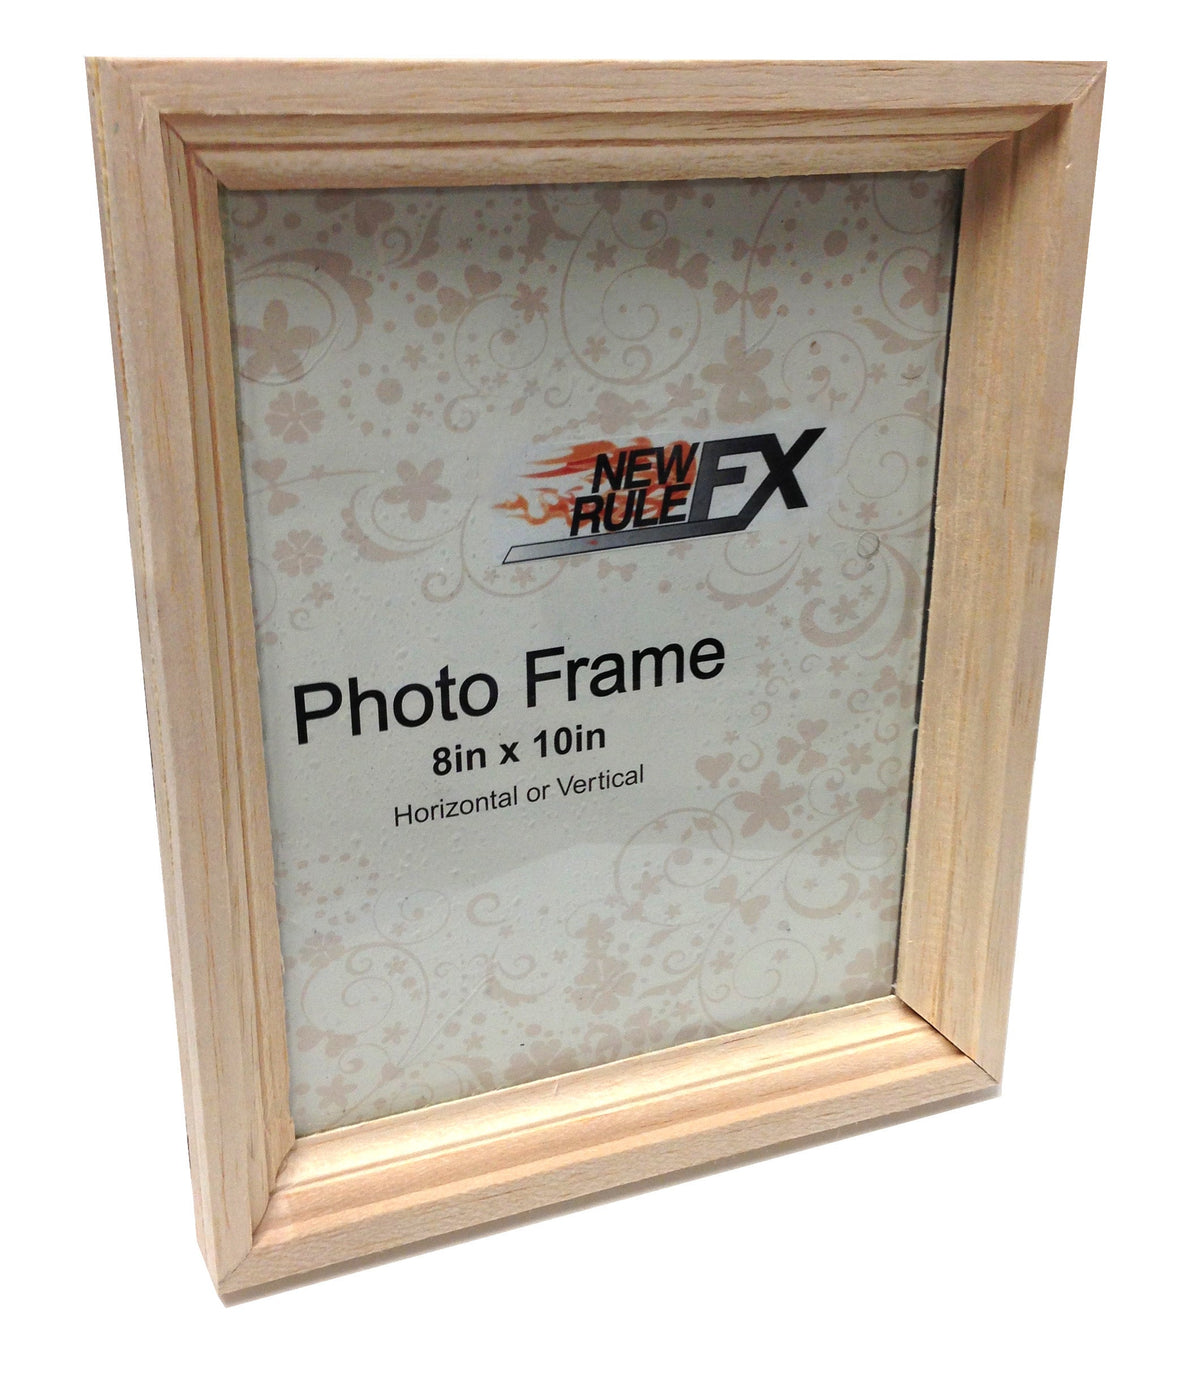 Balsa Wood and Breakaway Glass 8x10 Picture Frame Smashable Stunt Prop - NATURAL - Natural